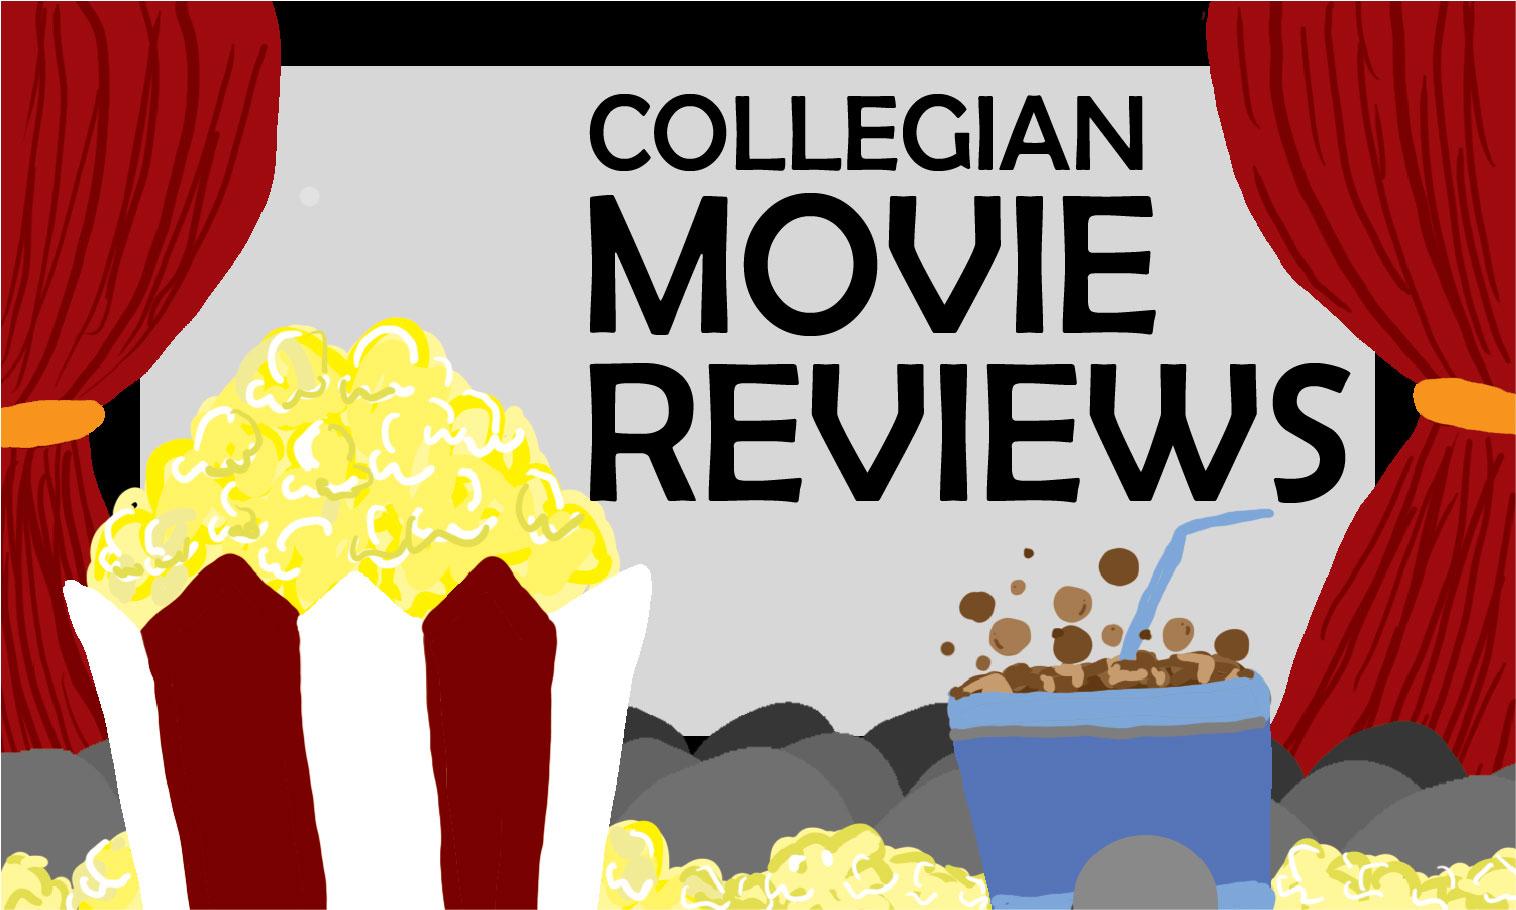 graphic illustration of a movie theater with popcorn and a soda with text reading "Collegian Movie Reviews"